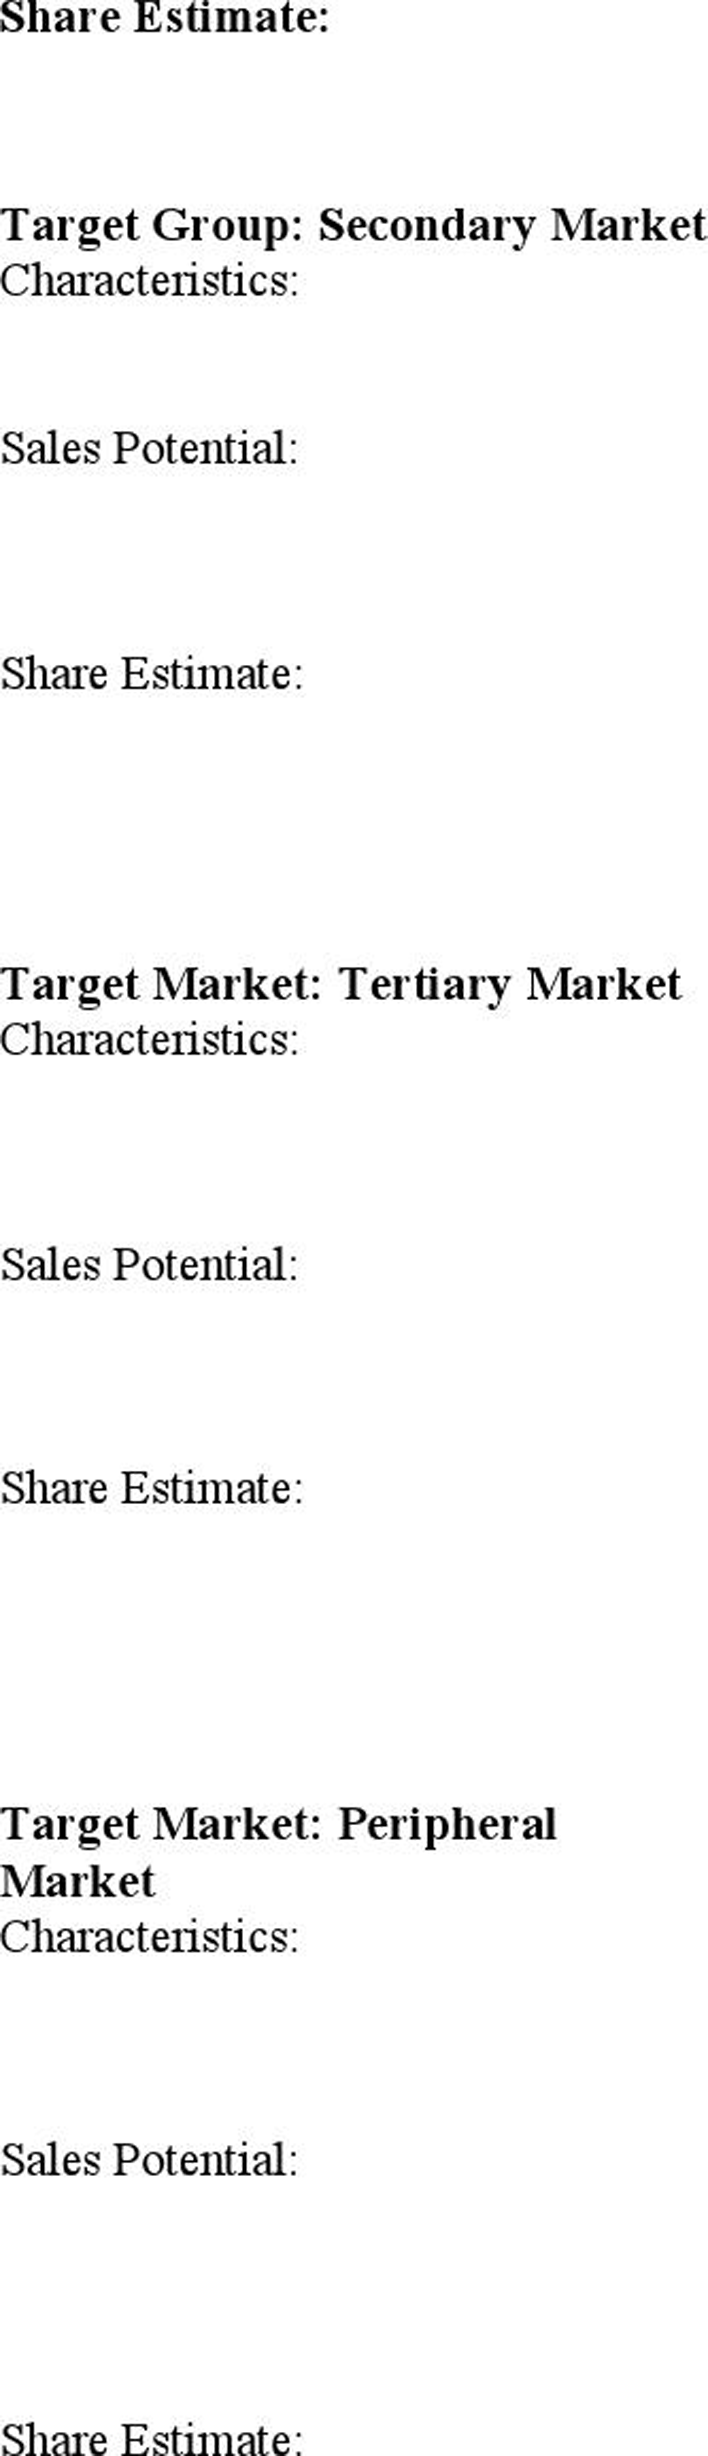 Market Analysis Template 1 Page 7